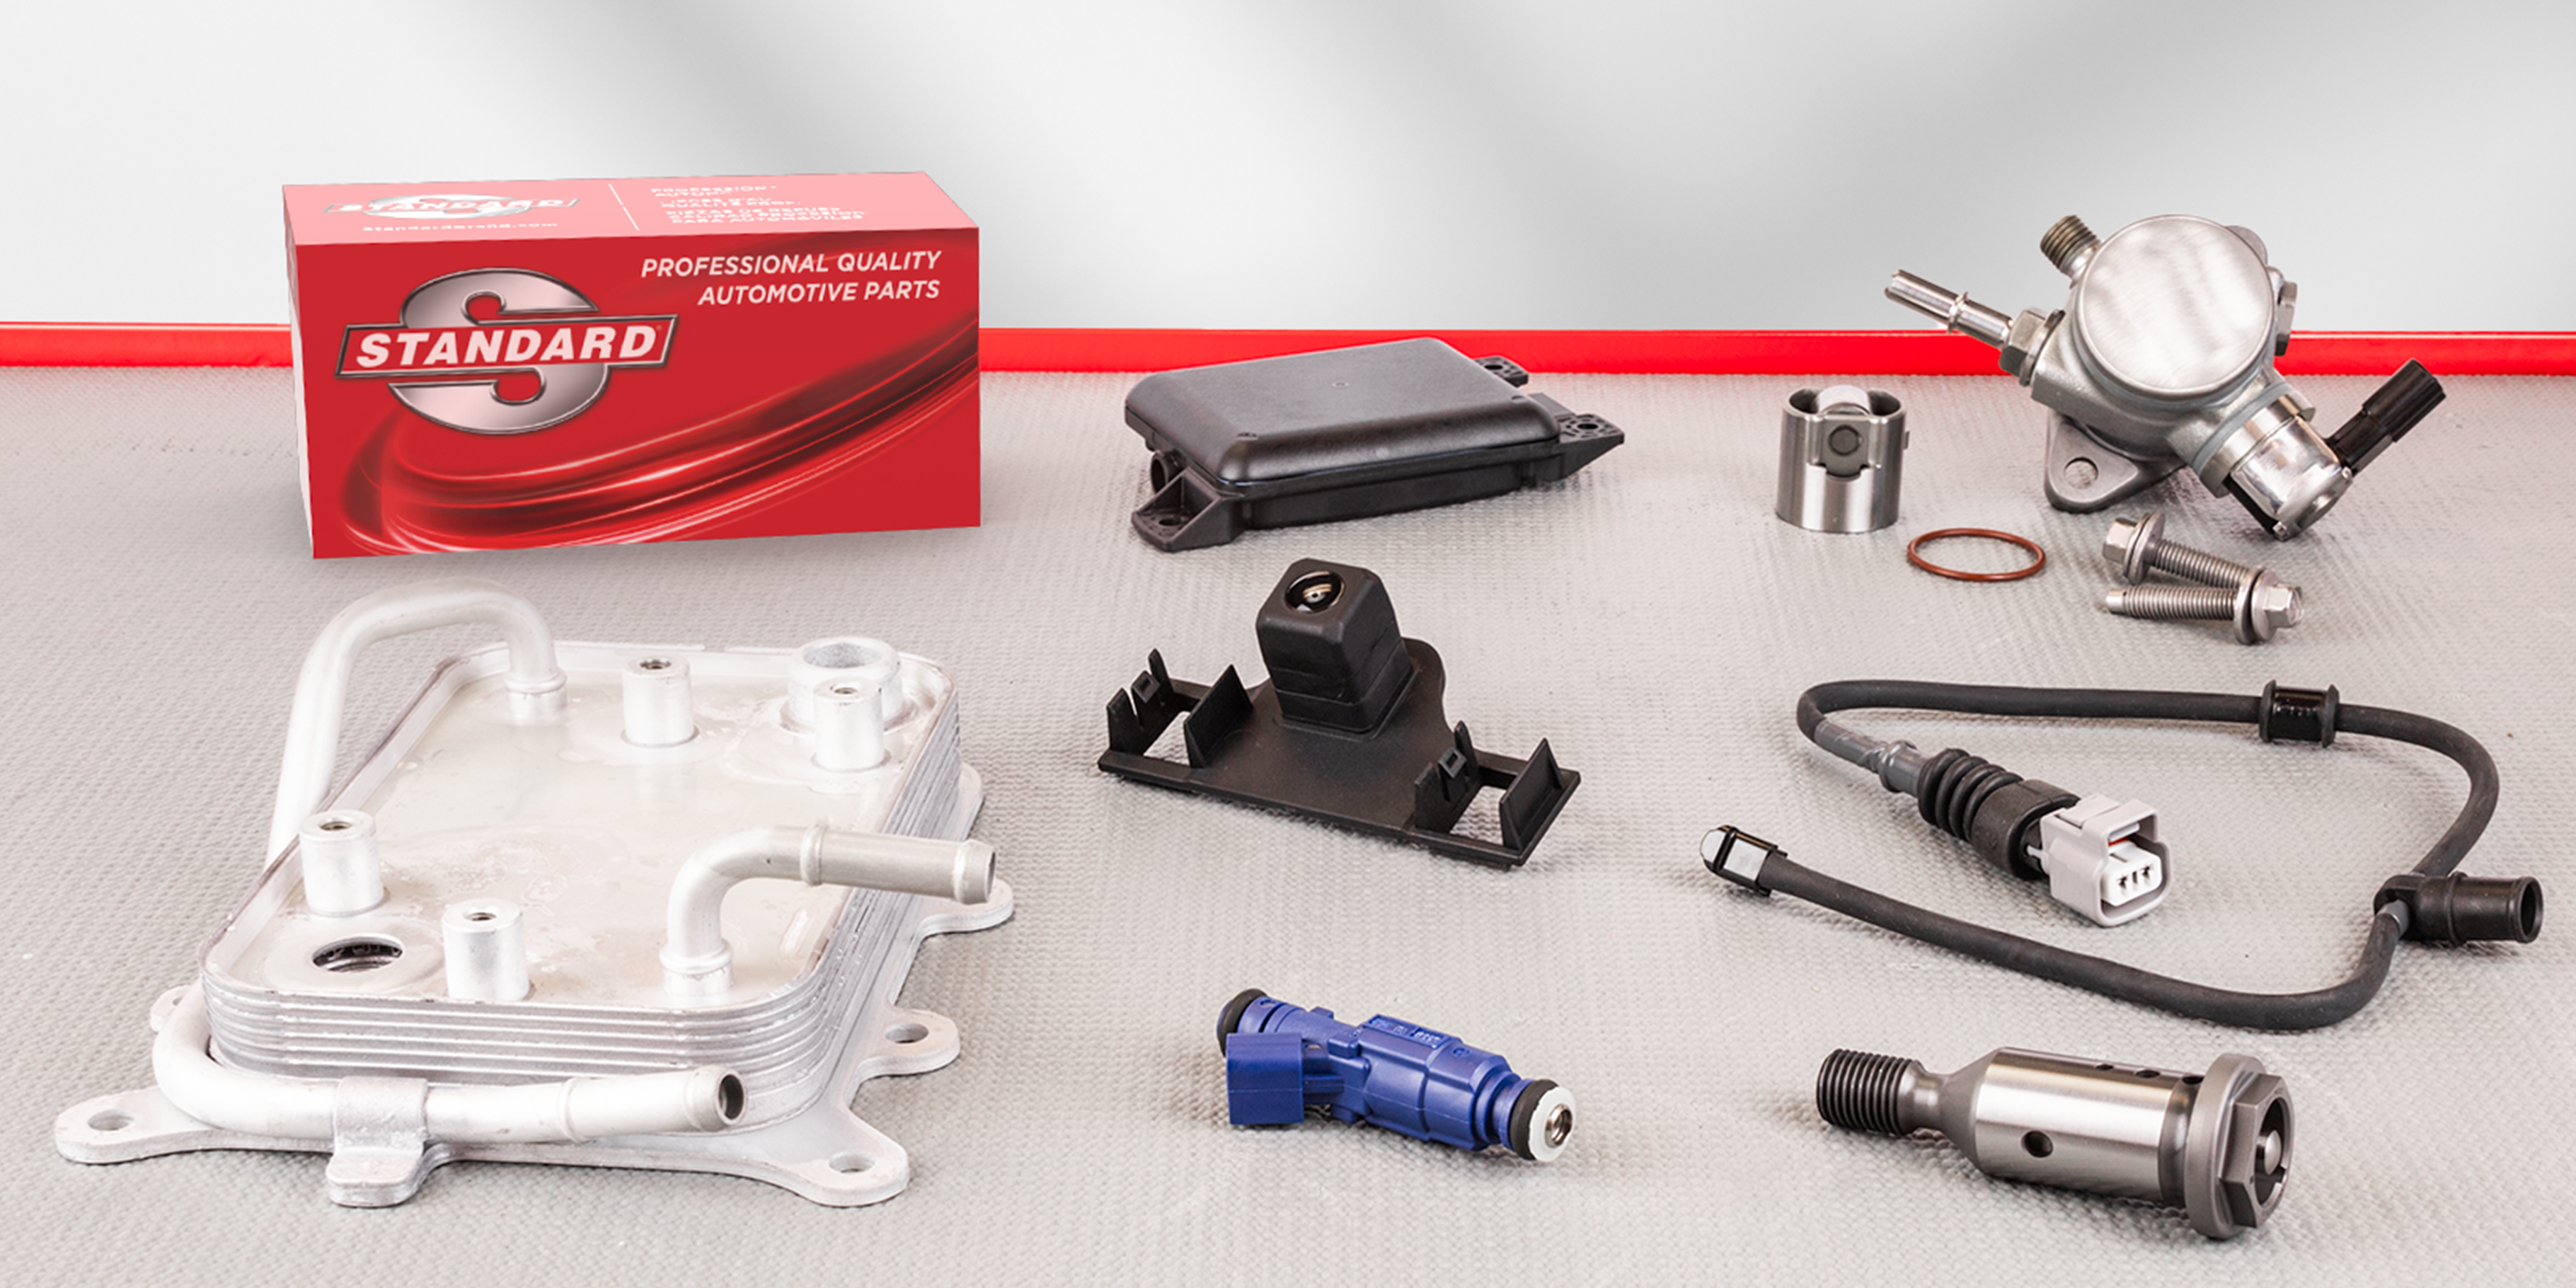 Standard Motor Products’ Releases 272 New Part Numbers